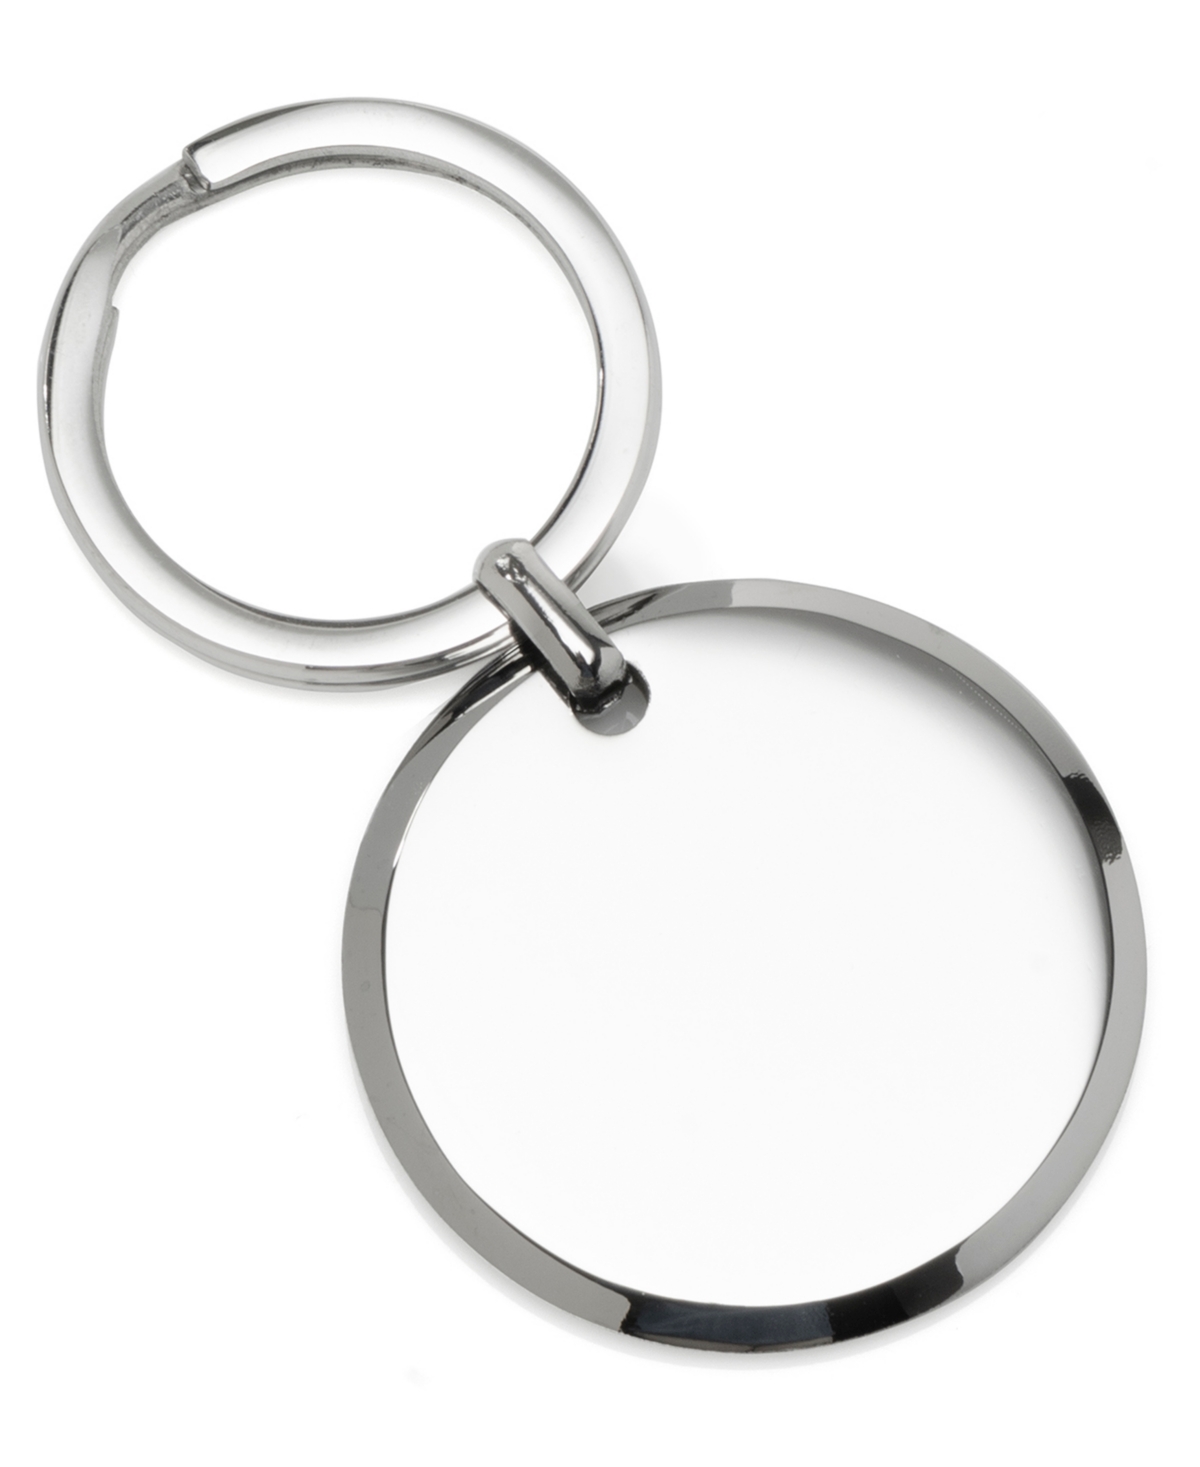 Men's Round Engravable Stainless Steel Key Chain - Silver-Tone